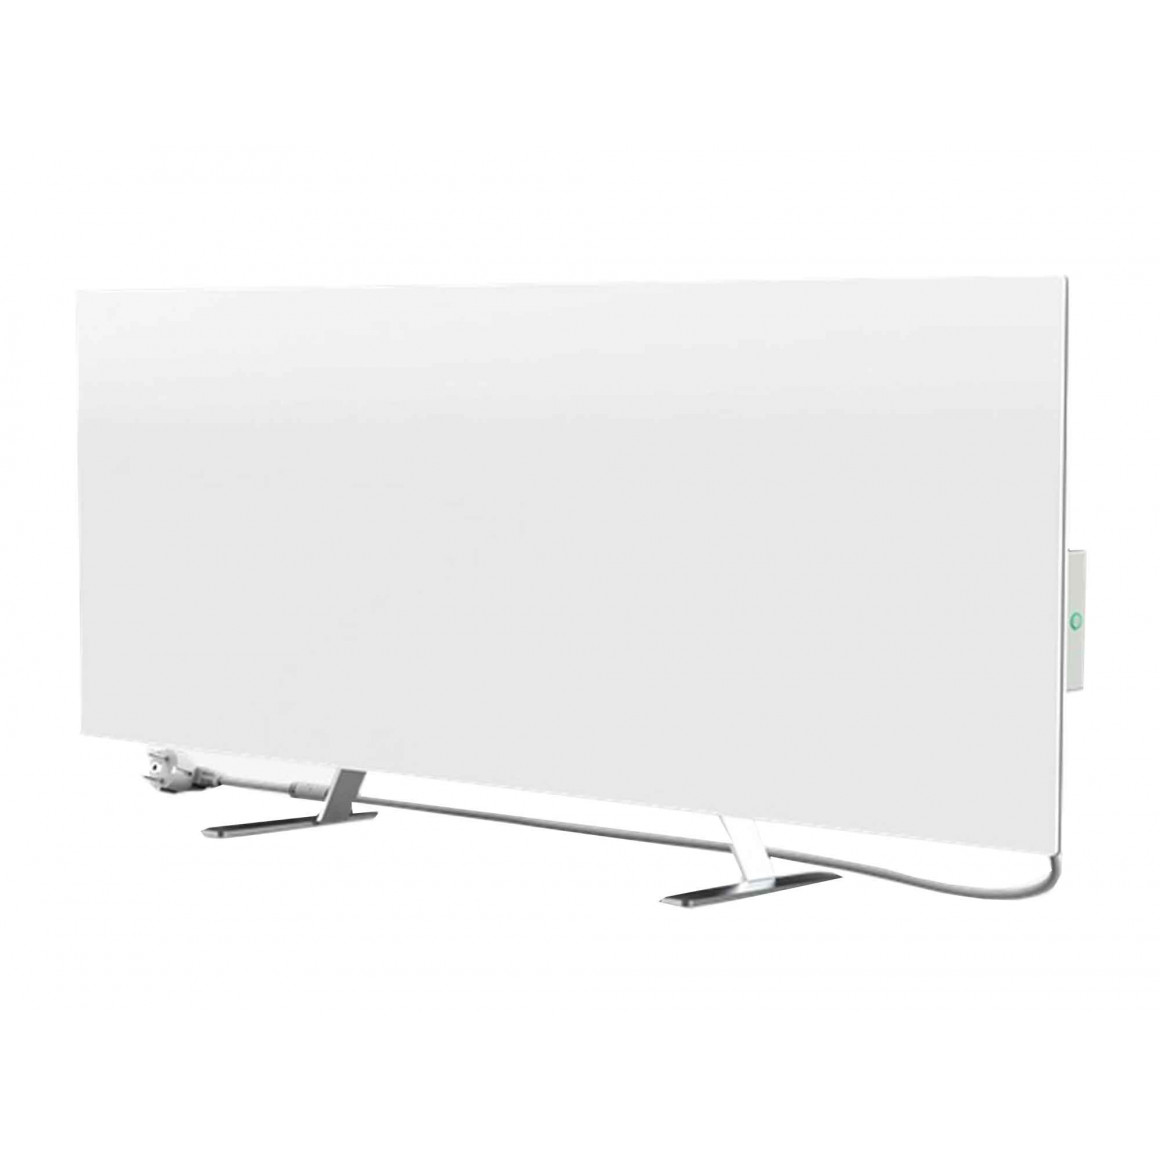 heaters JOULE ECO SMART WH